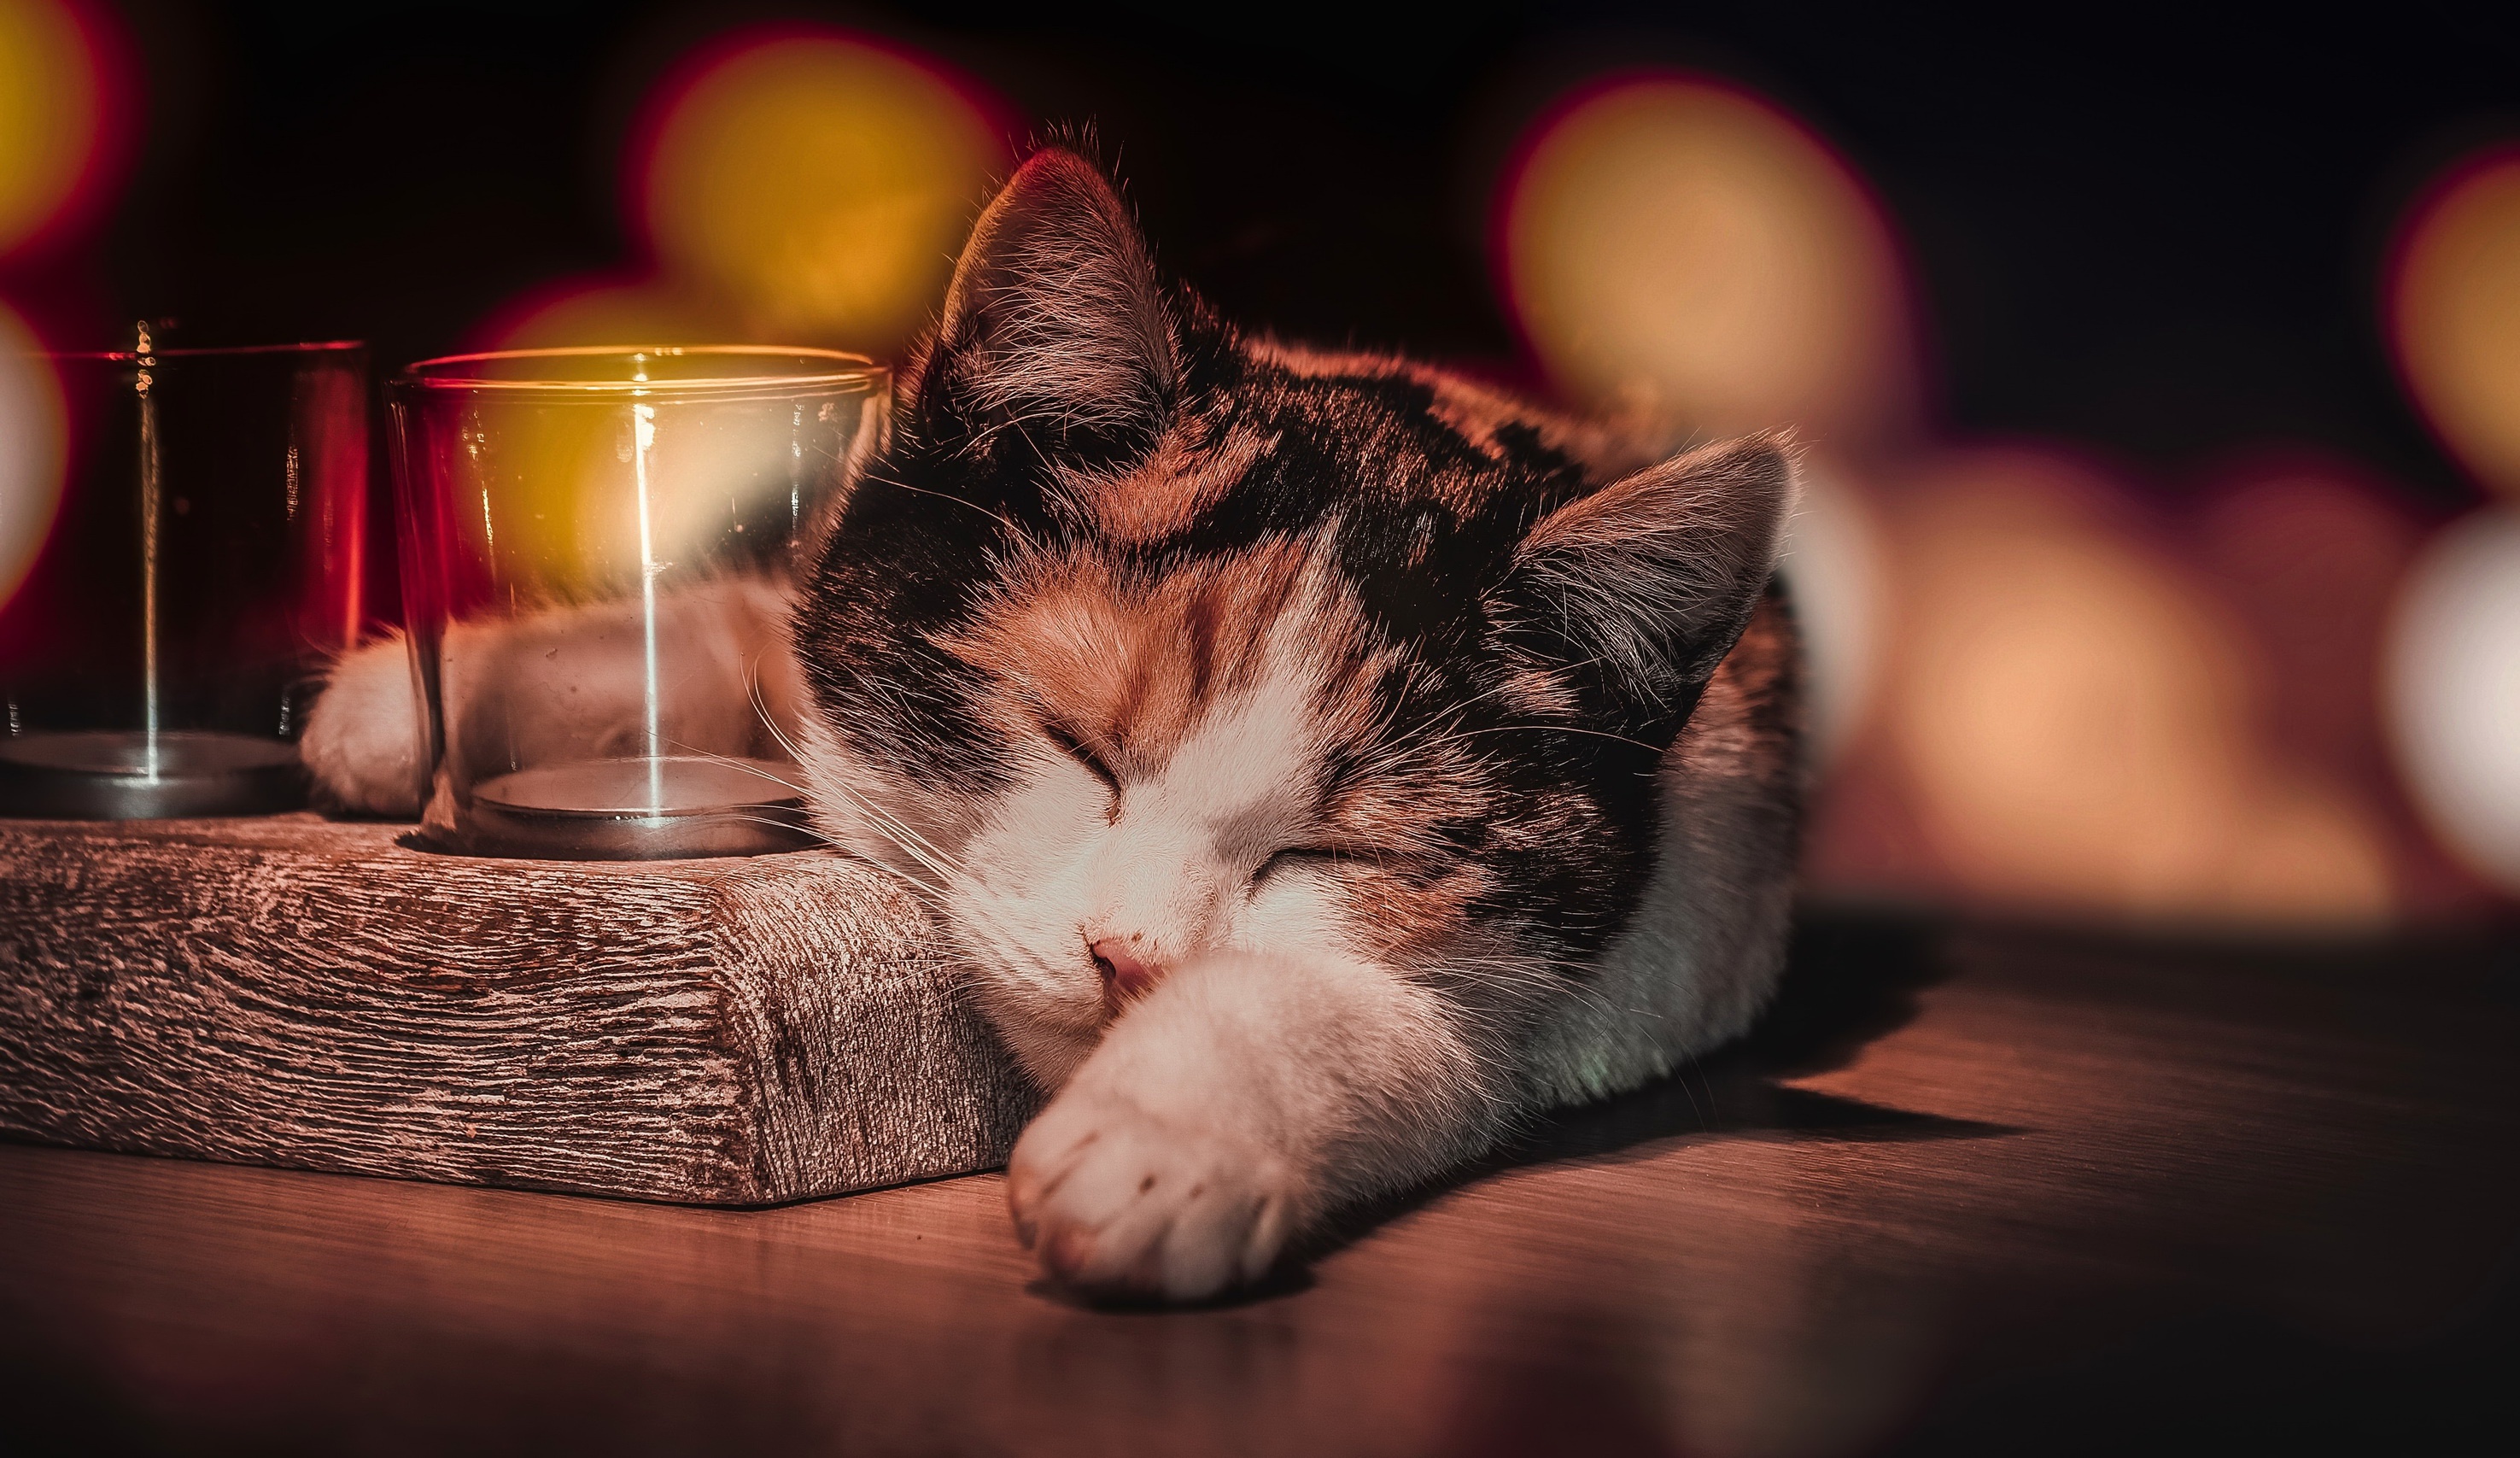 Cat Sleeping, HD Animals, 4k Wallpapers, Images, Backgrounds, Photos